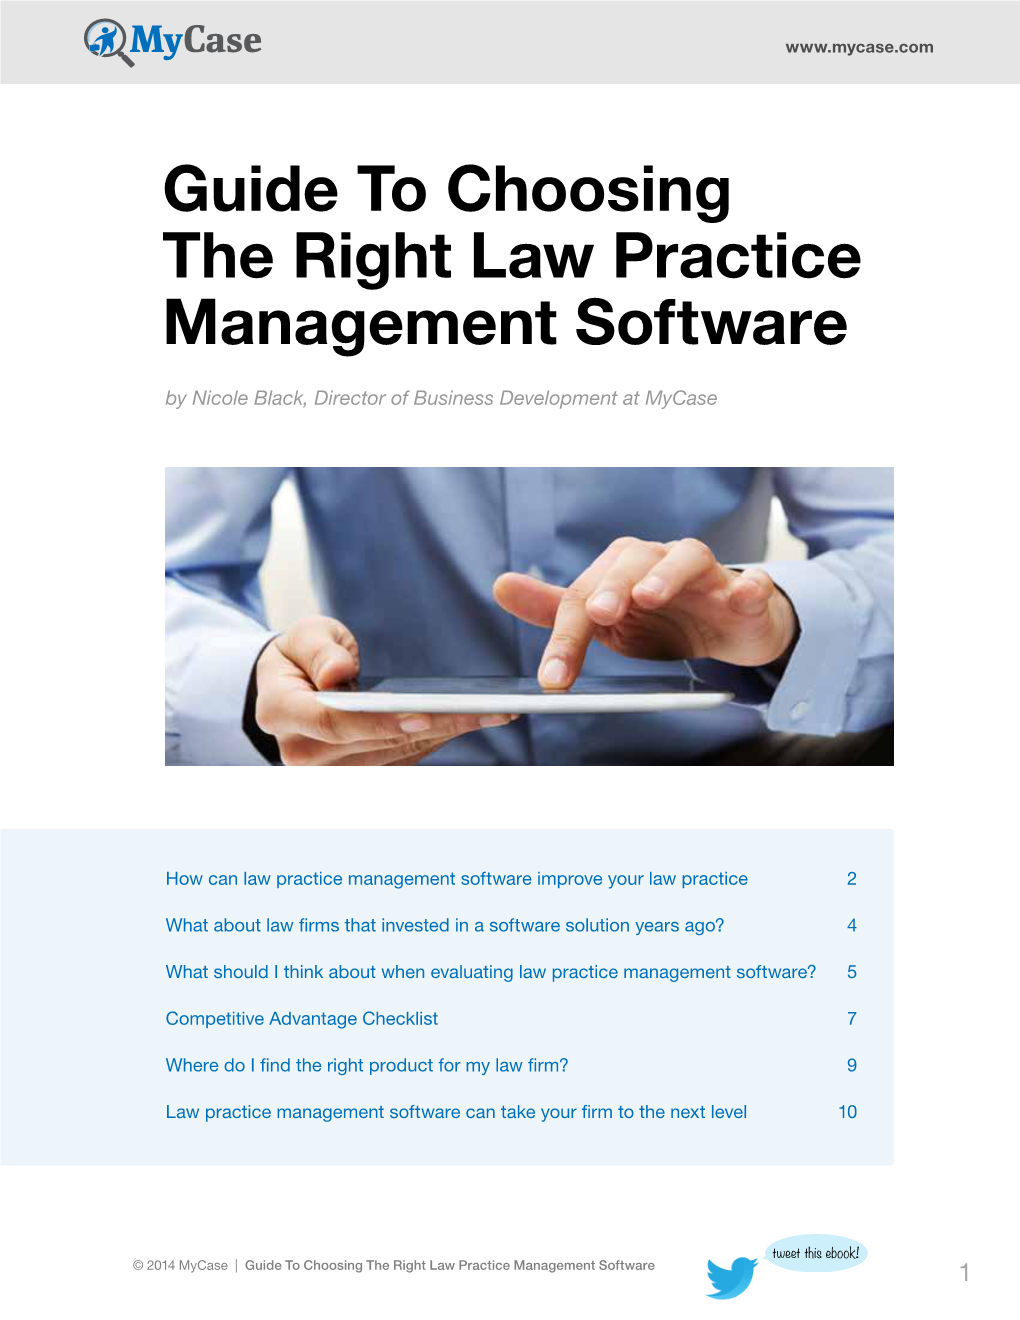 Guide to Choosing the Right Law Practice Management Software by Nicole Black, Director of Business Development at Mycase